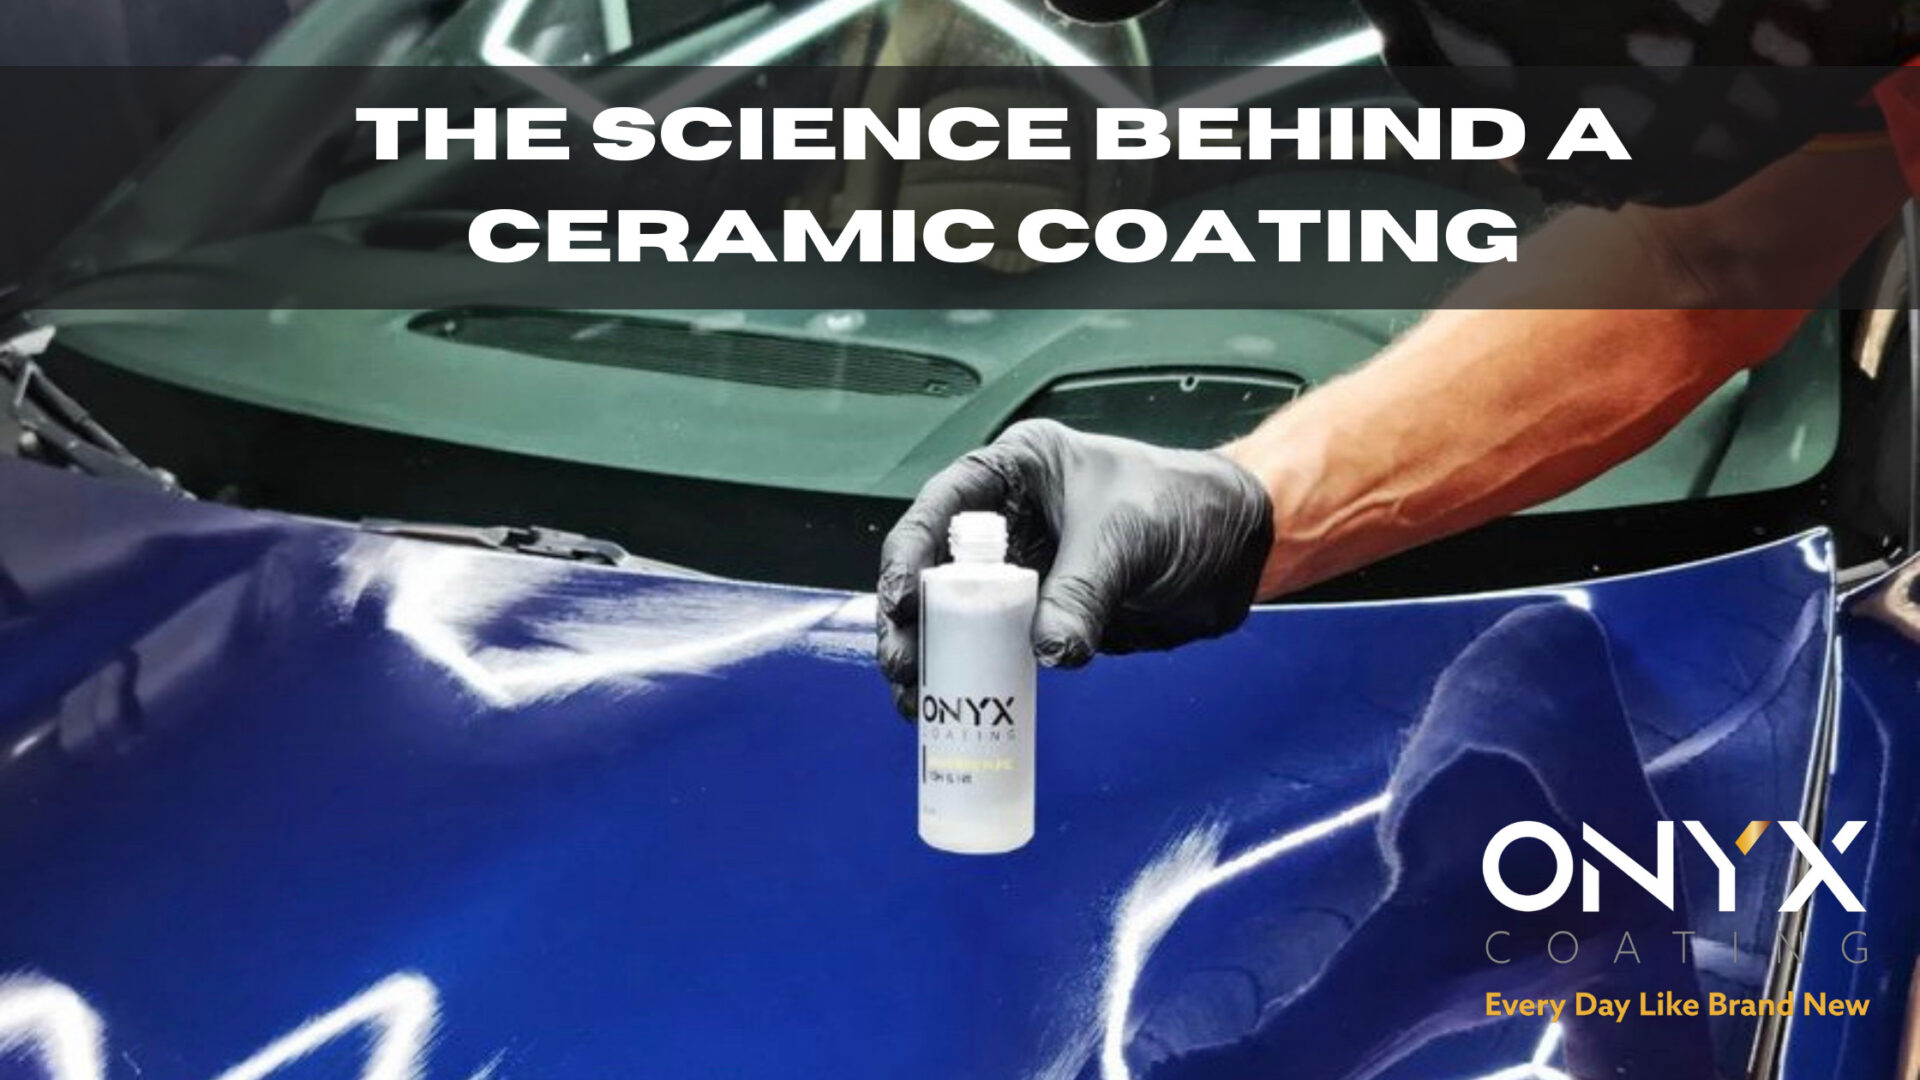 The Science Behind a Ceramic Coating